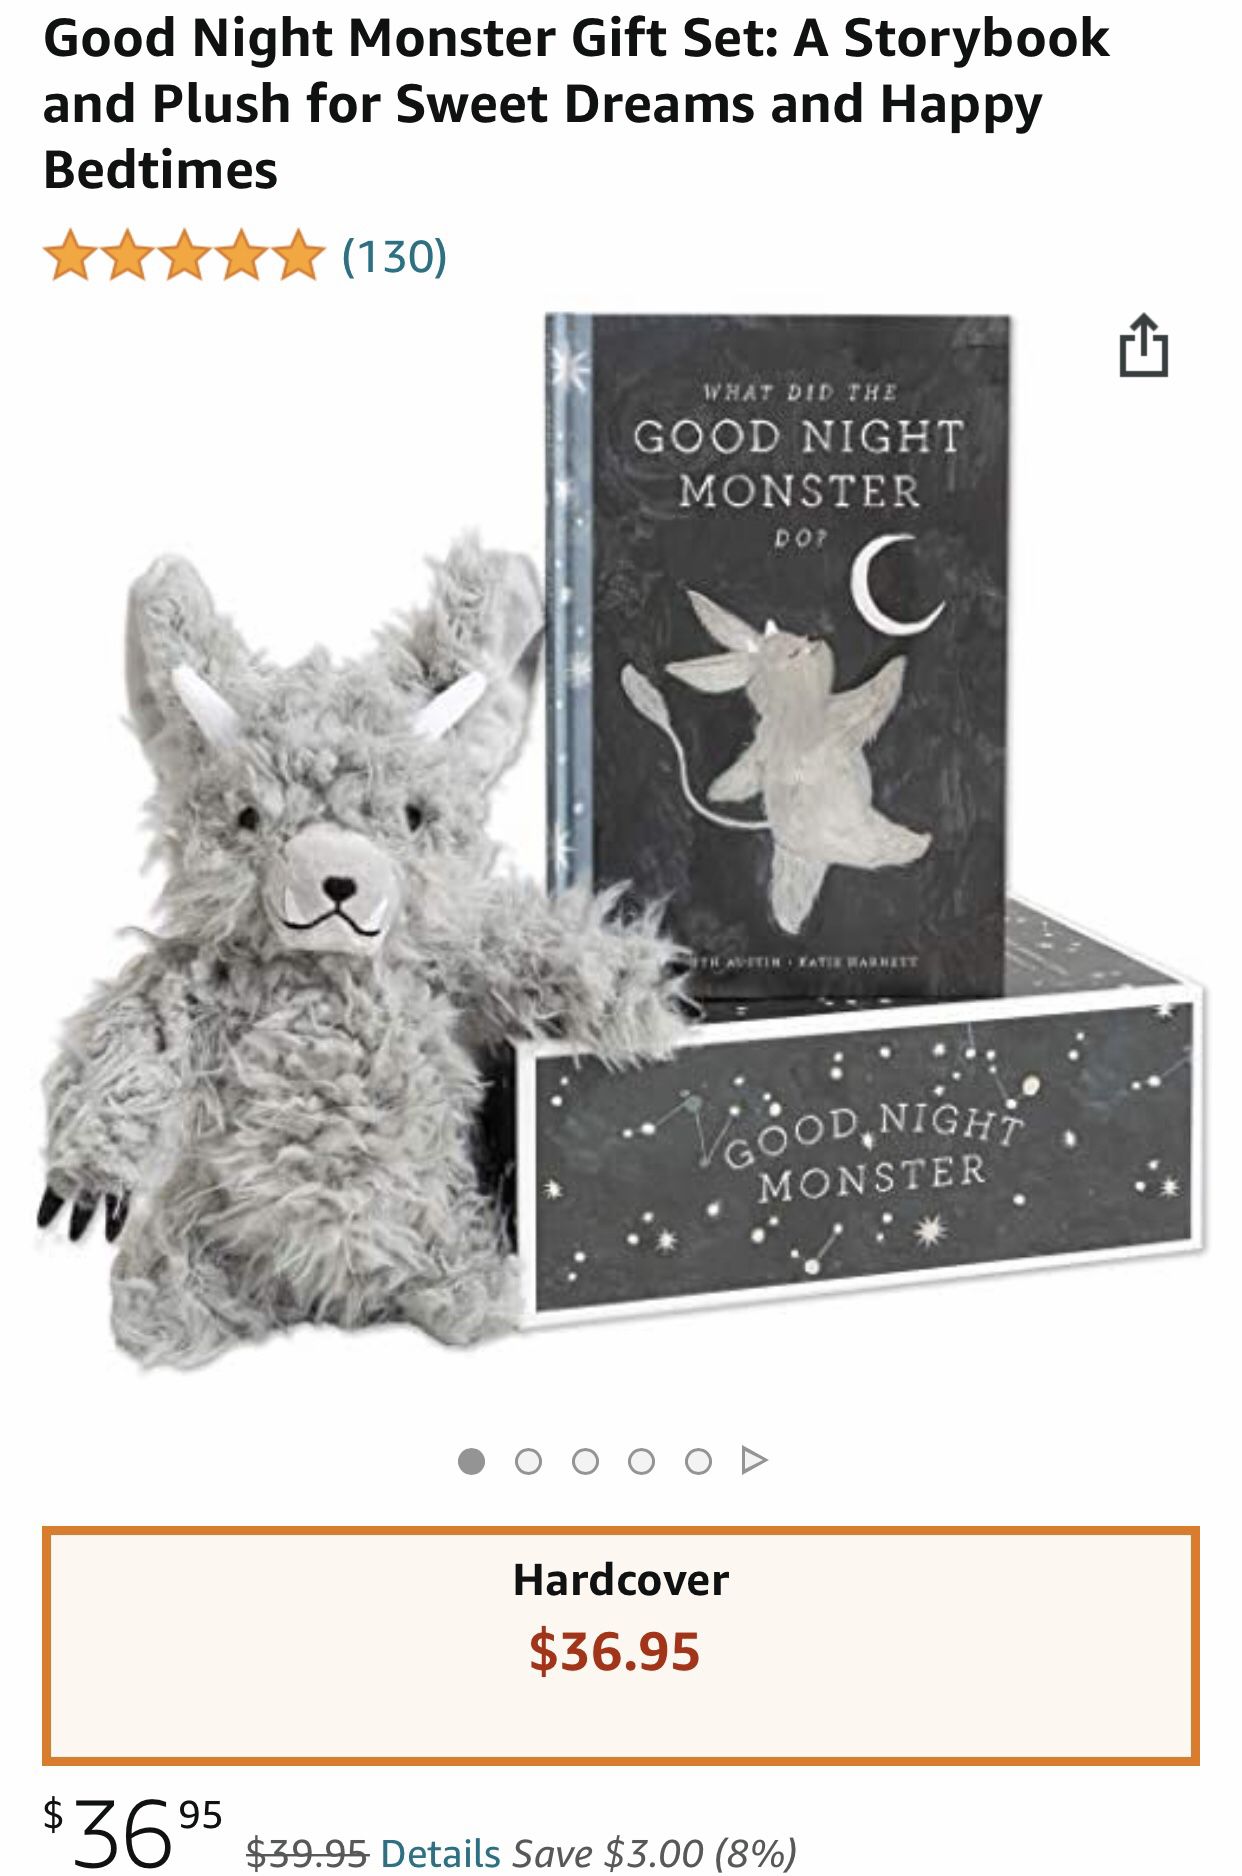 Good Night Monster Gift Set: A Storybook and Plush for Sweet Dreams and Happy Bedtimes. Halloween